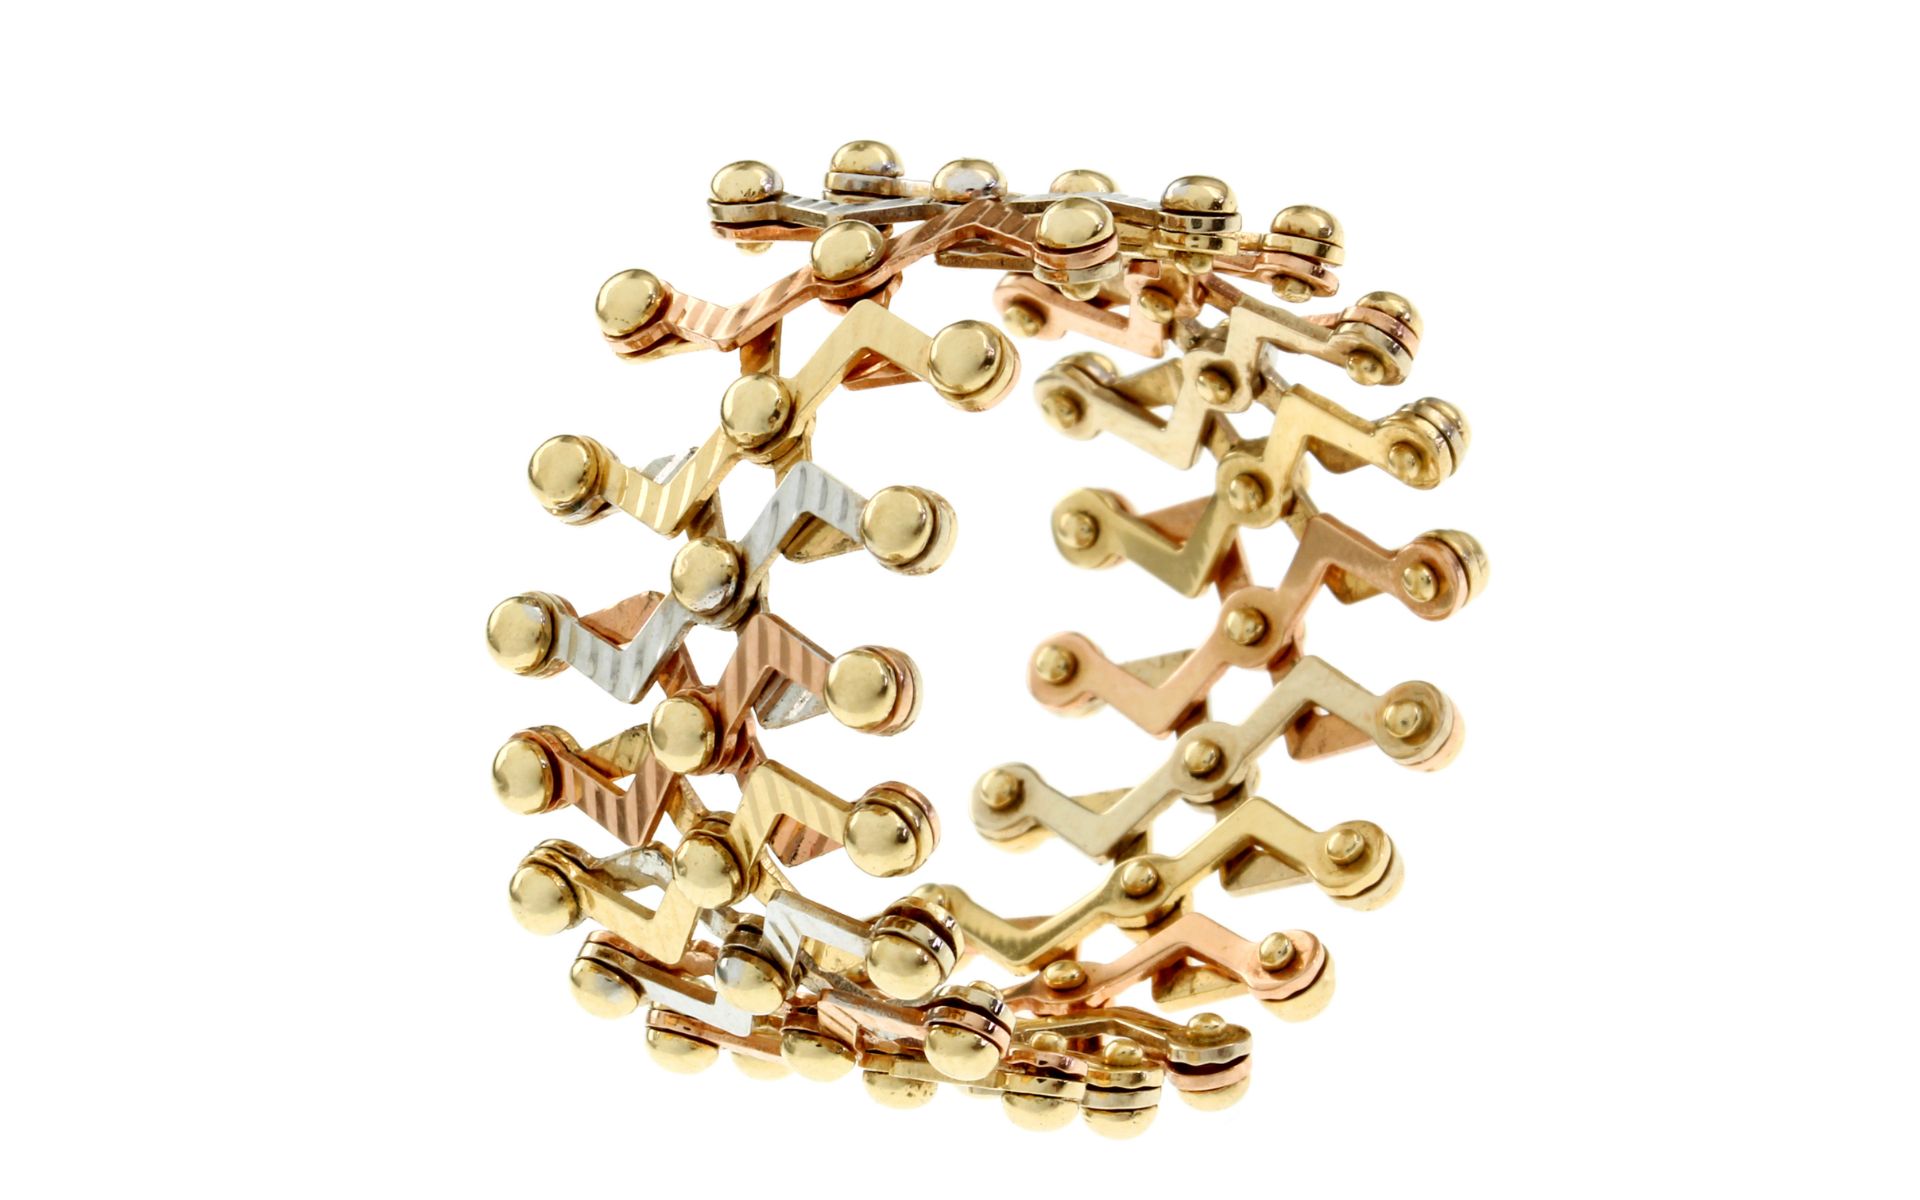 Ring/Armband 2 in 1 11,23g 585/- Gelbgold, Weissgold und Rotgold